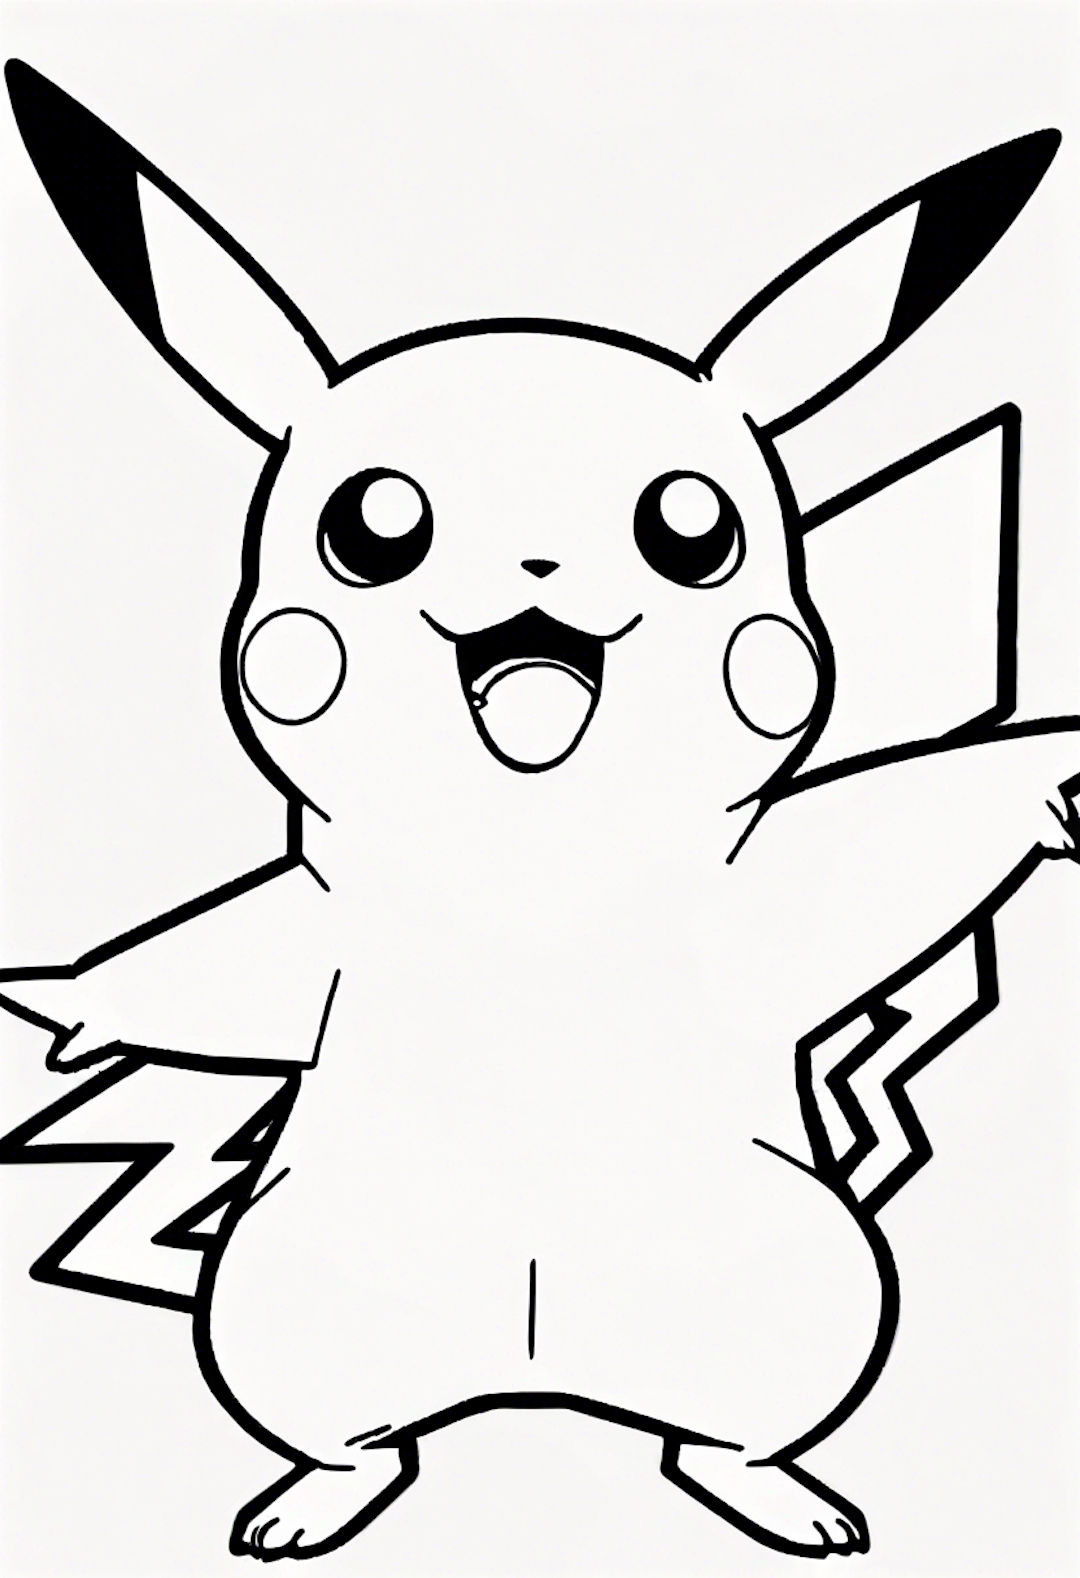 Excited Pikachu